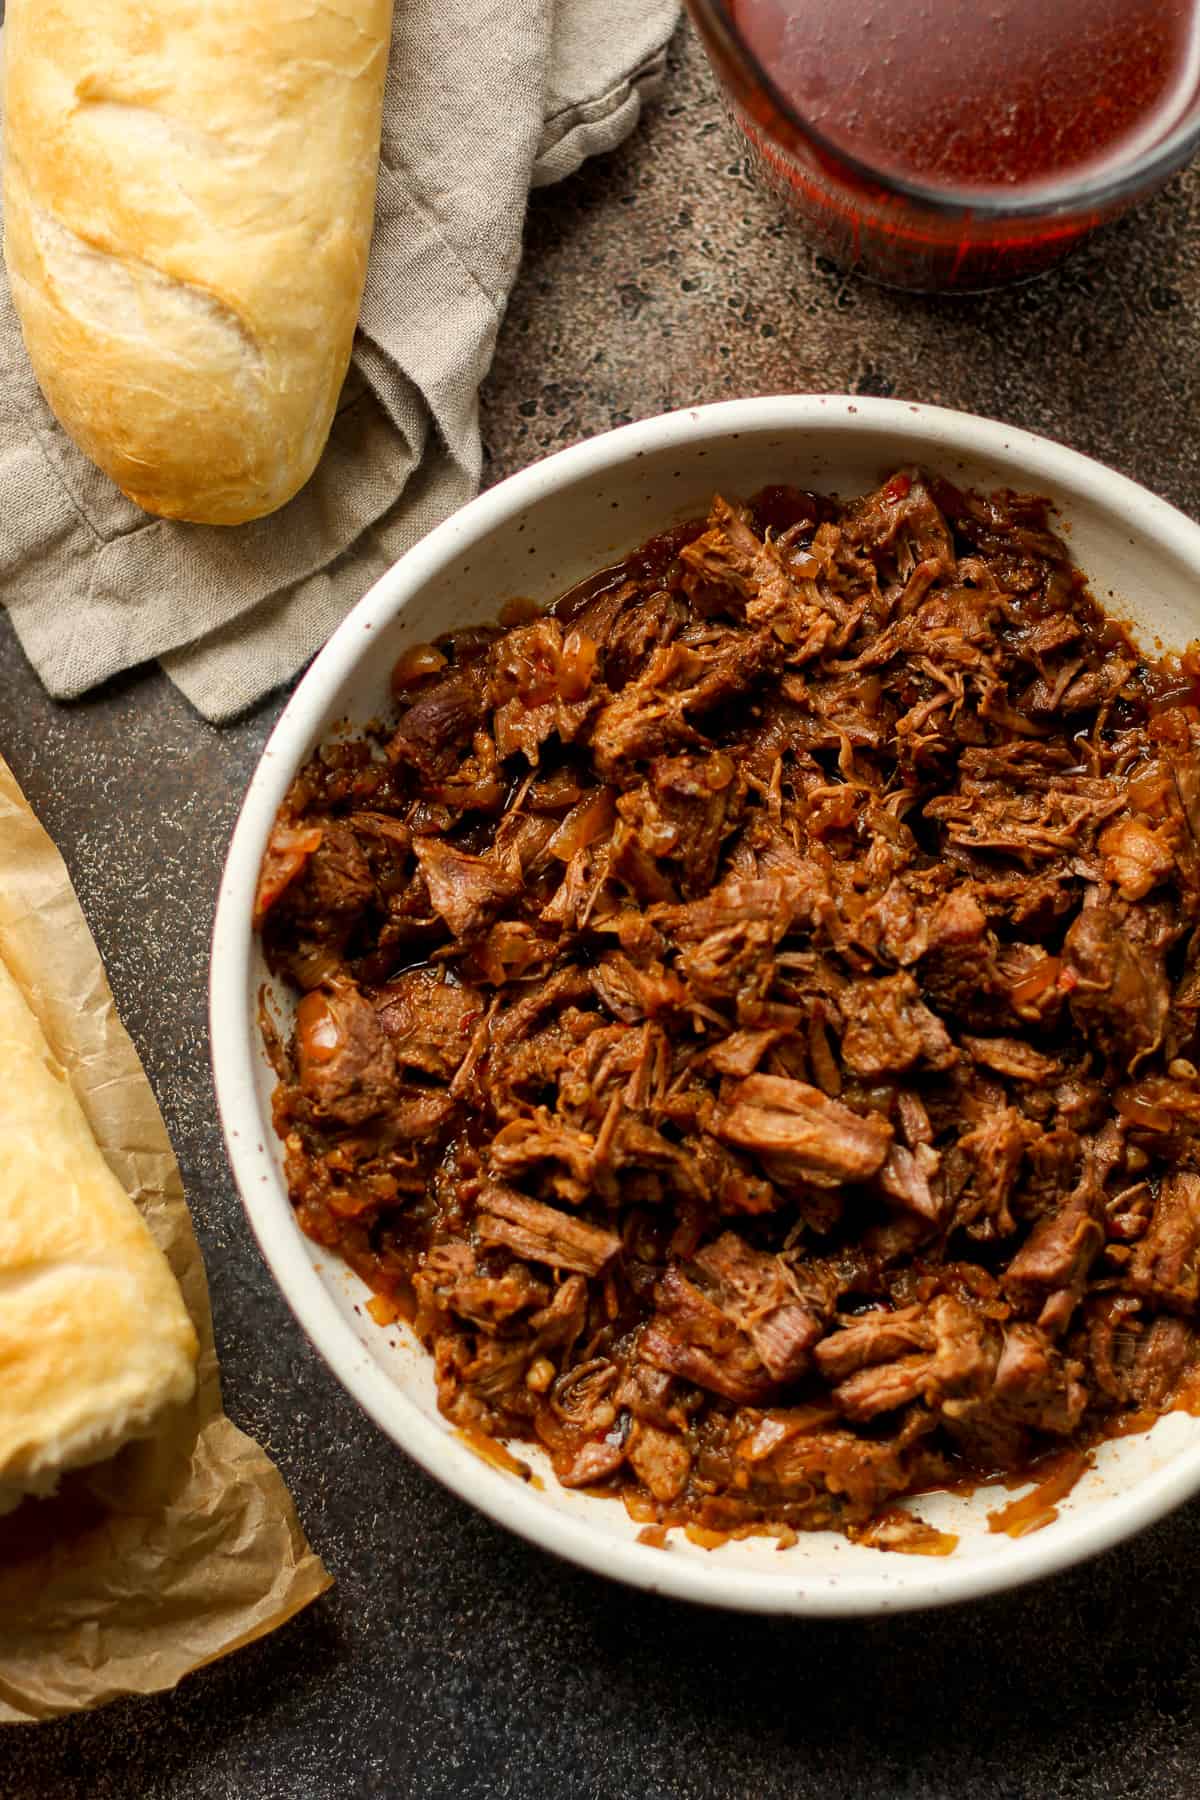 Overhead view of a bowl of beef, with some bread and the au jus.